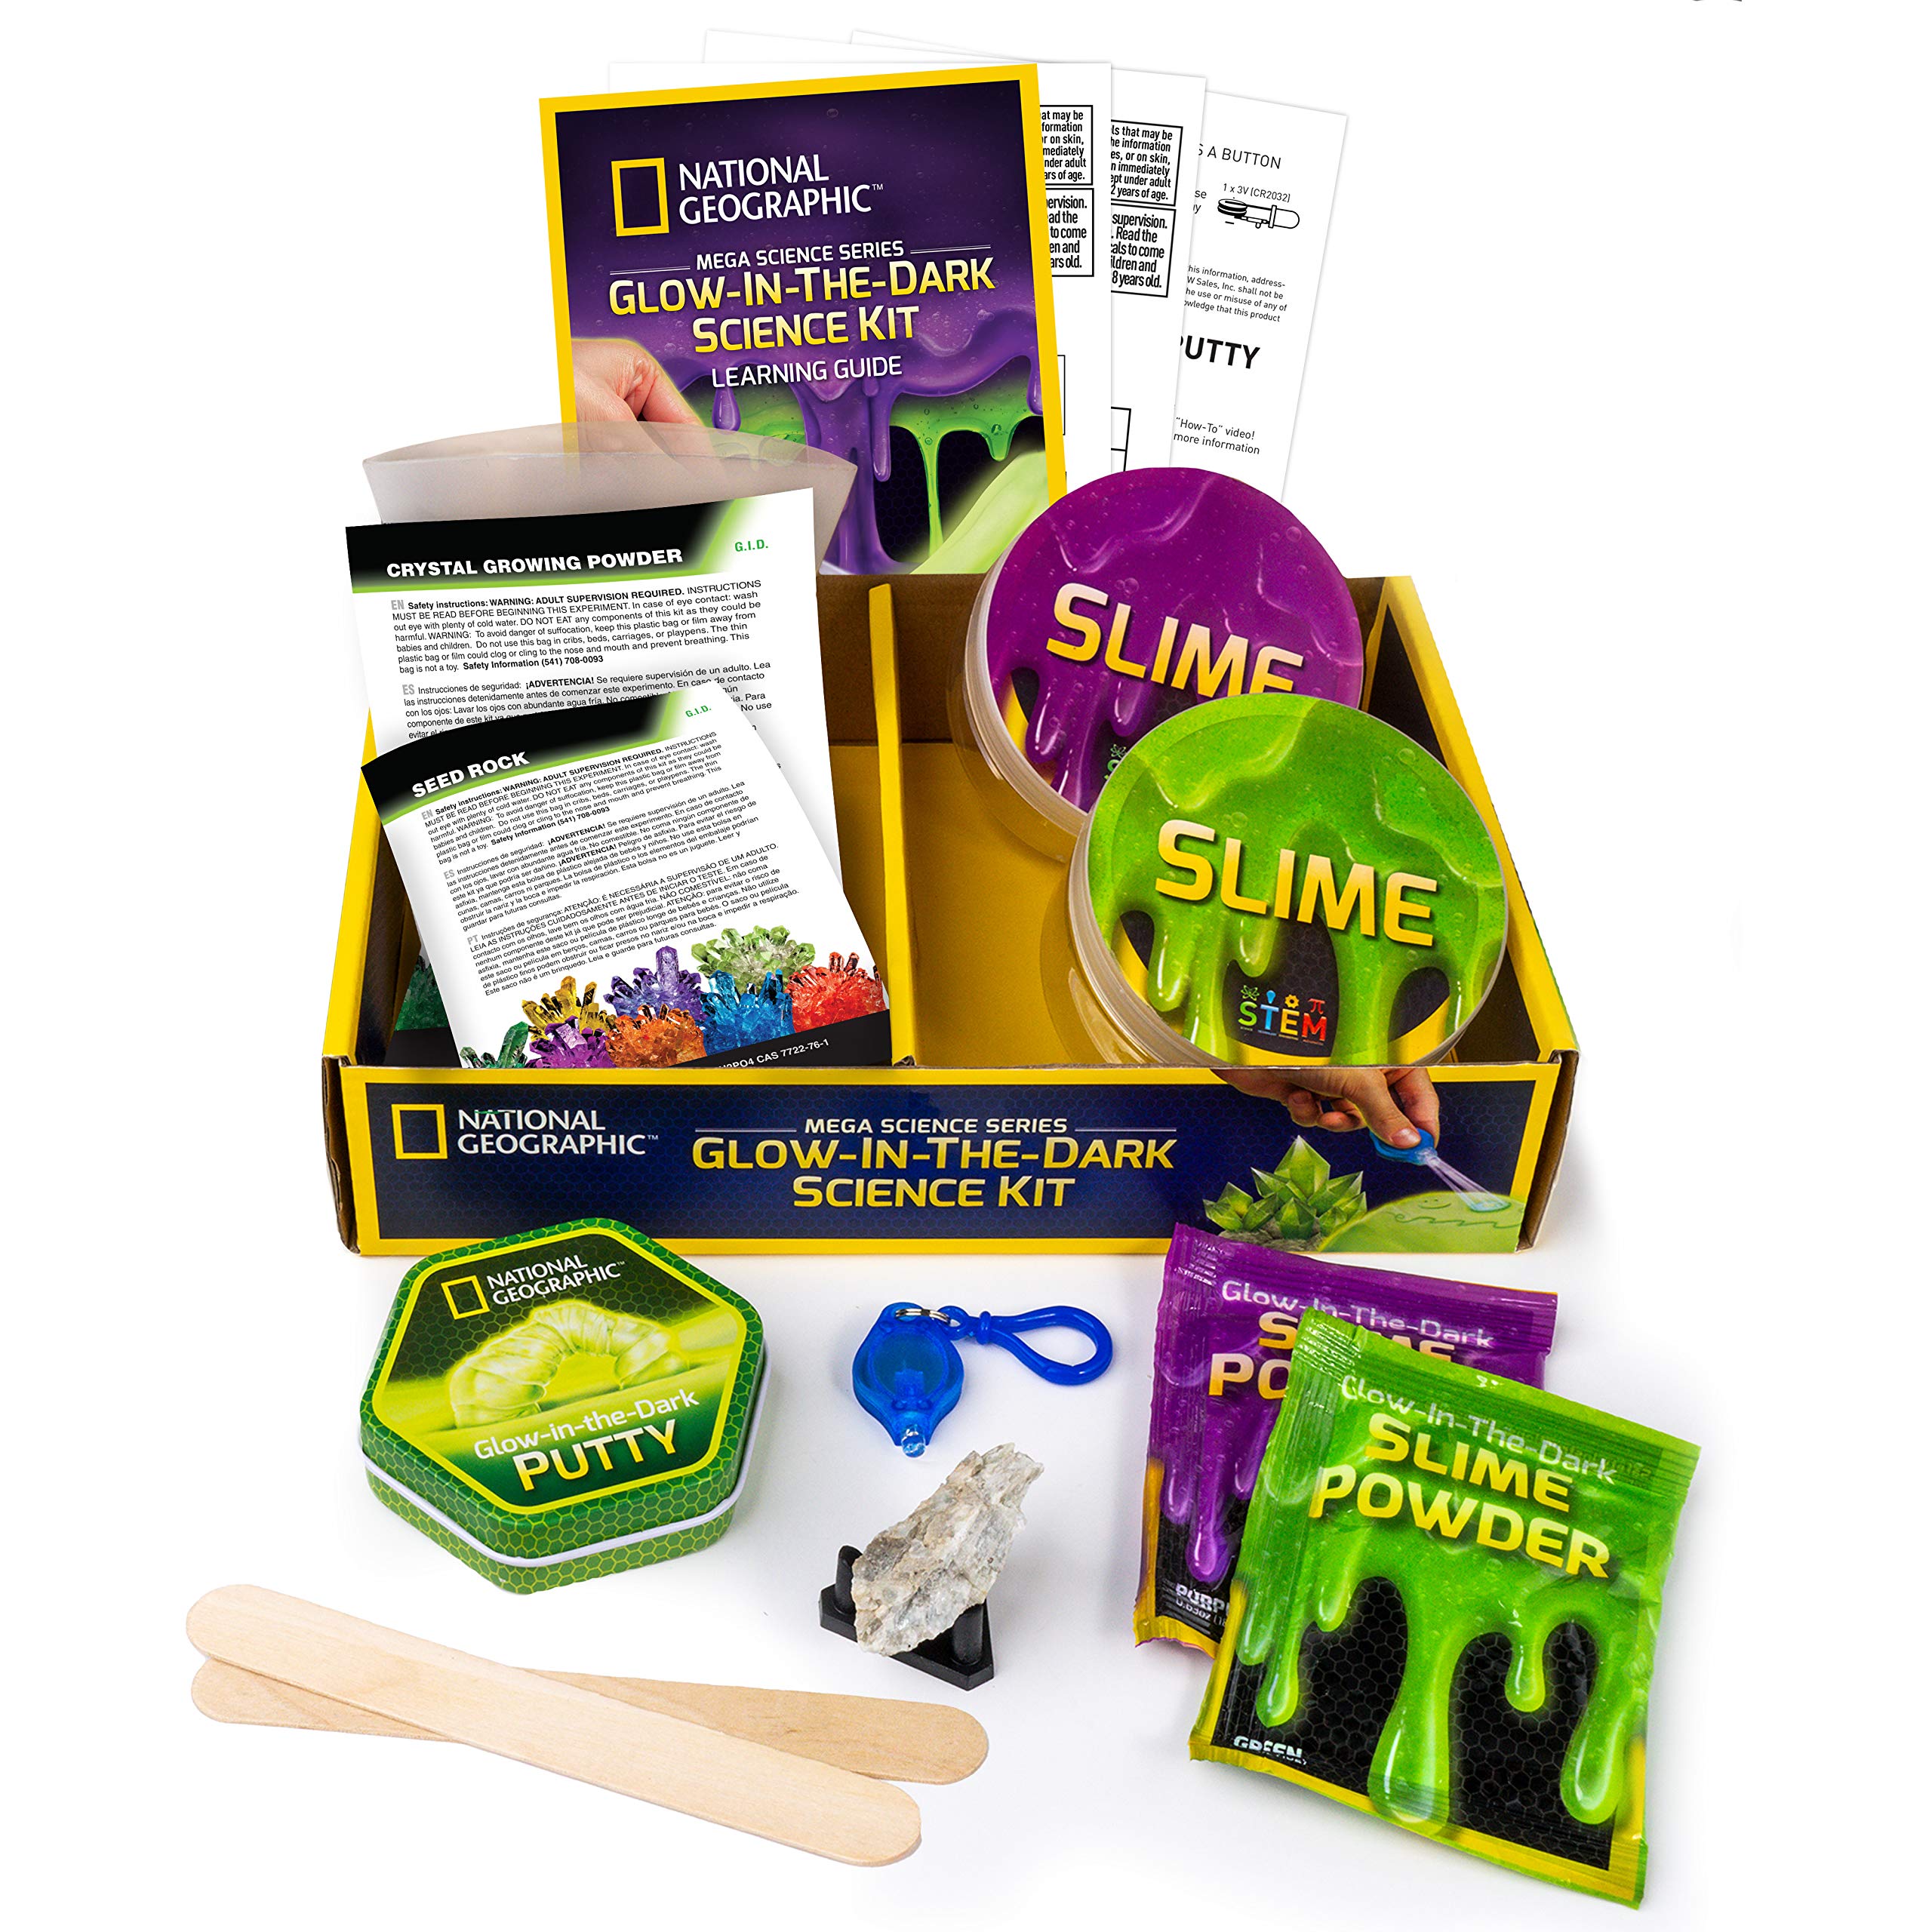 NATIONAL GEOGRAPHIC Mega Science Kit - Glow in The Dark Lab with Crystal Growing Kit, Slime Making, Glowing Putty, and More Science Experiments, Slime Kit for Boys and Girls (Amazon Exclusive)